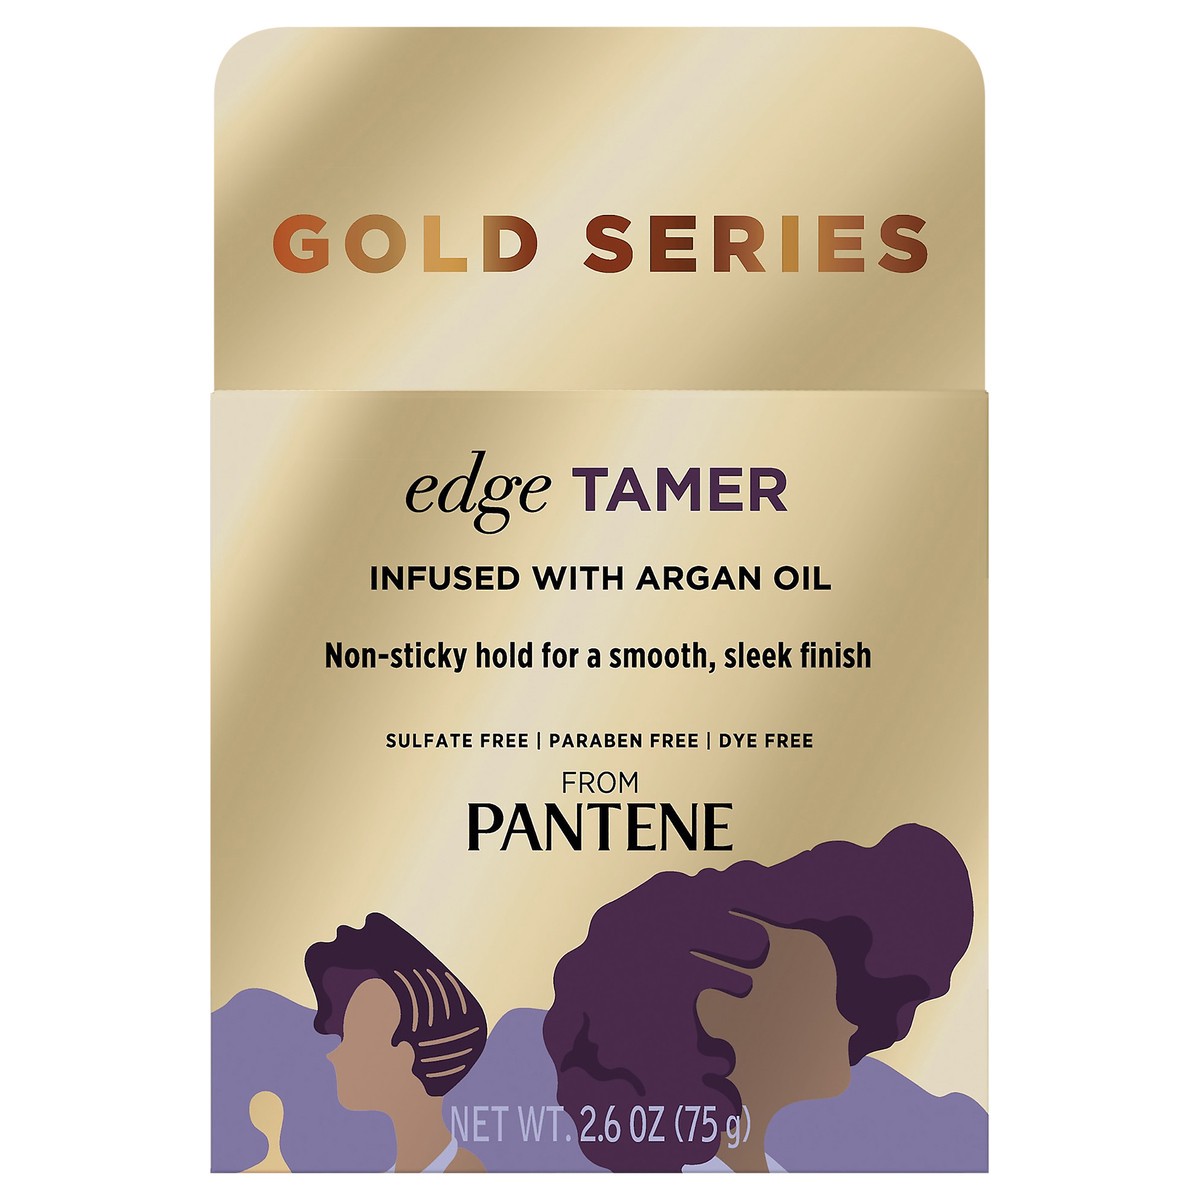 slide 11 of 11, Pantene Gold Series from Pantene Sulfate-Free Edge Tamer Treatment with Argan Oil, Non-Sticky Edge Control, 2.6 fl oz, 2.6 oz